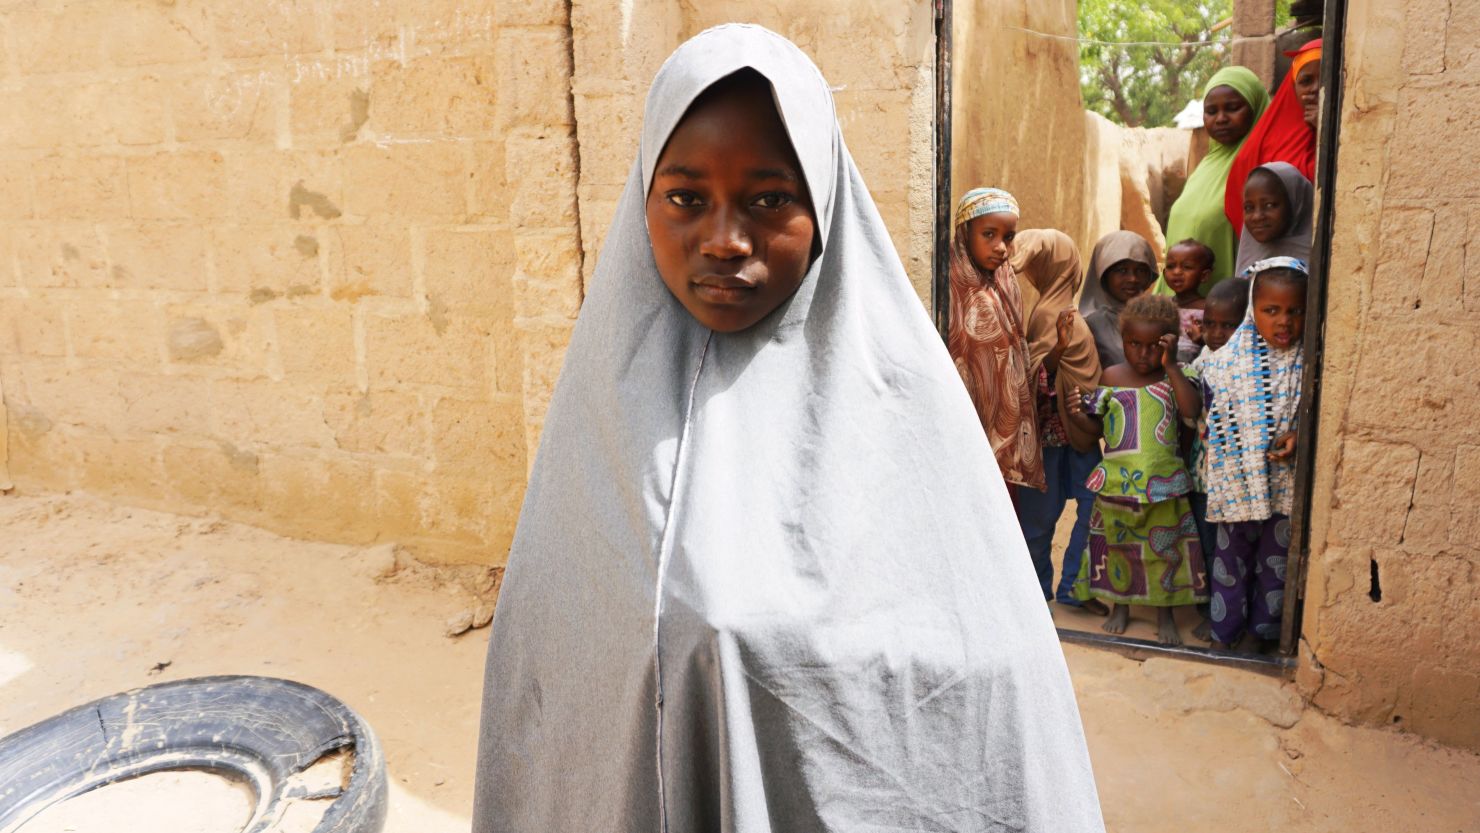 Hassana Mohammed, 13, who scaled a fence to escape a Boko Haram attack at her school, outside her home in Dapchi. 